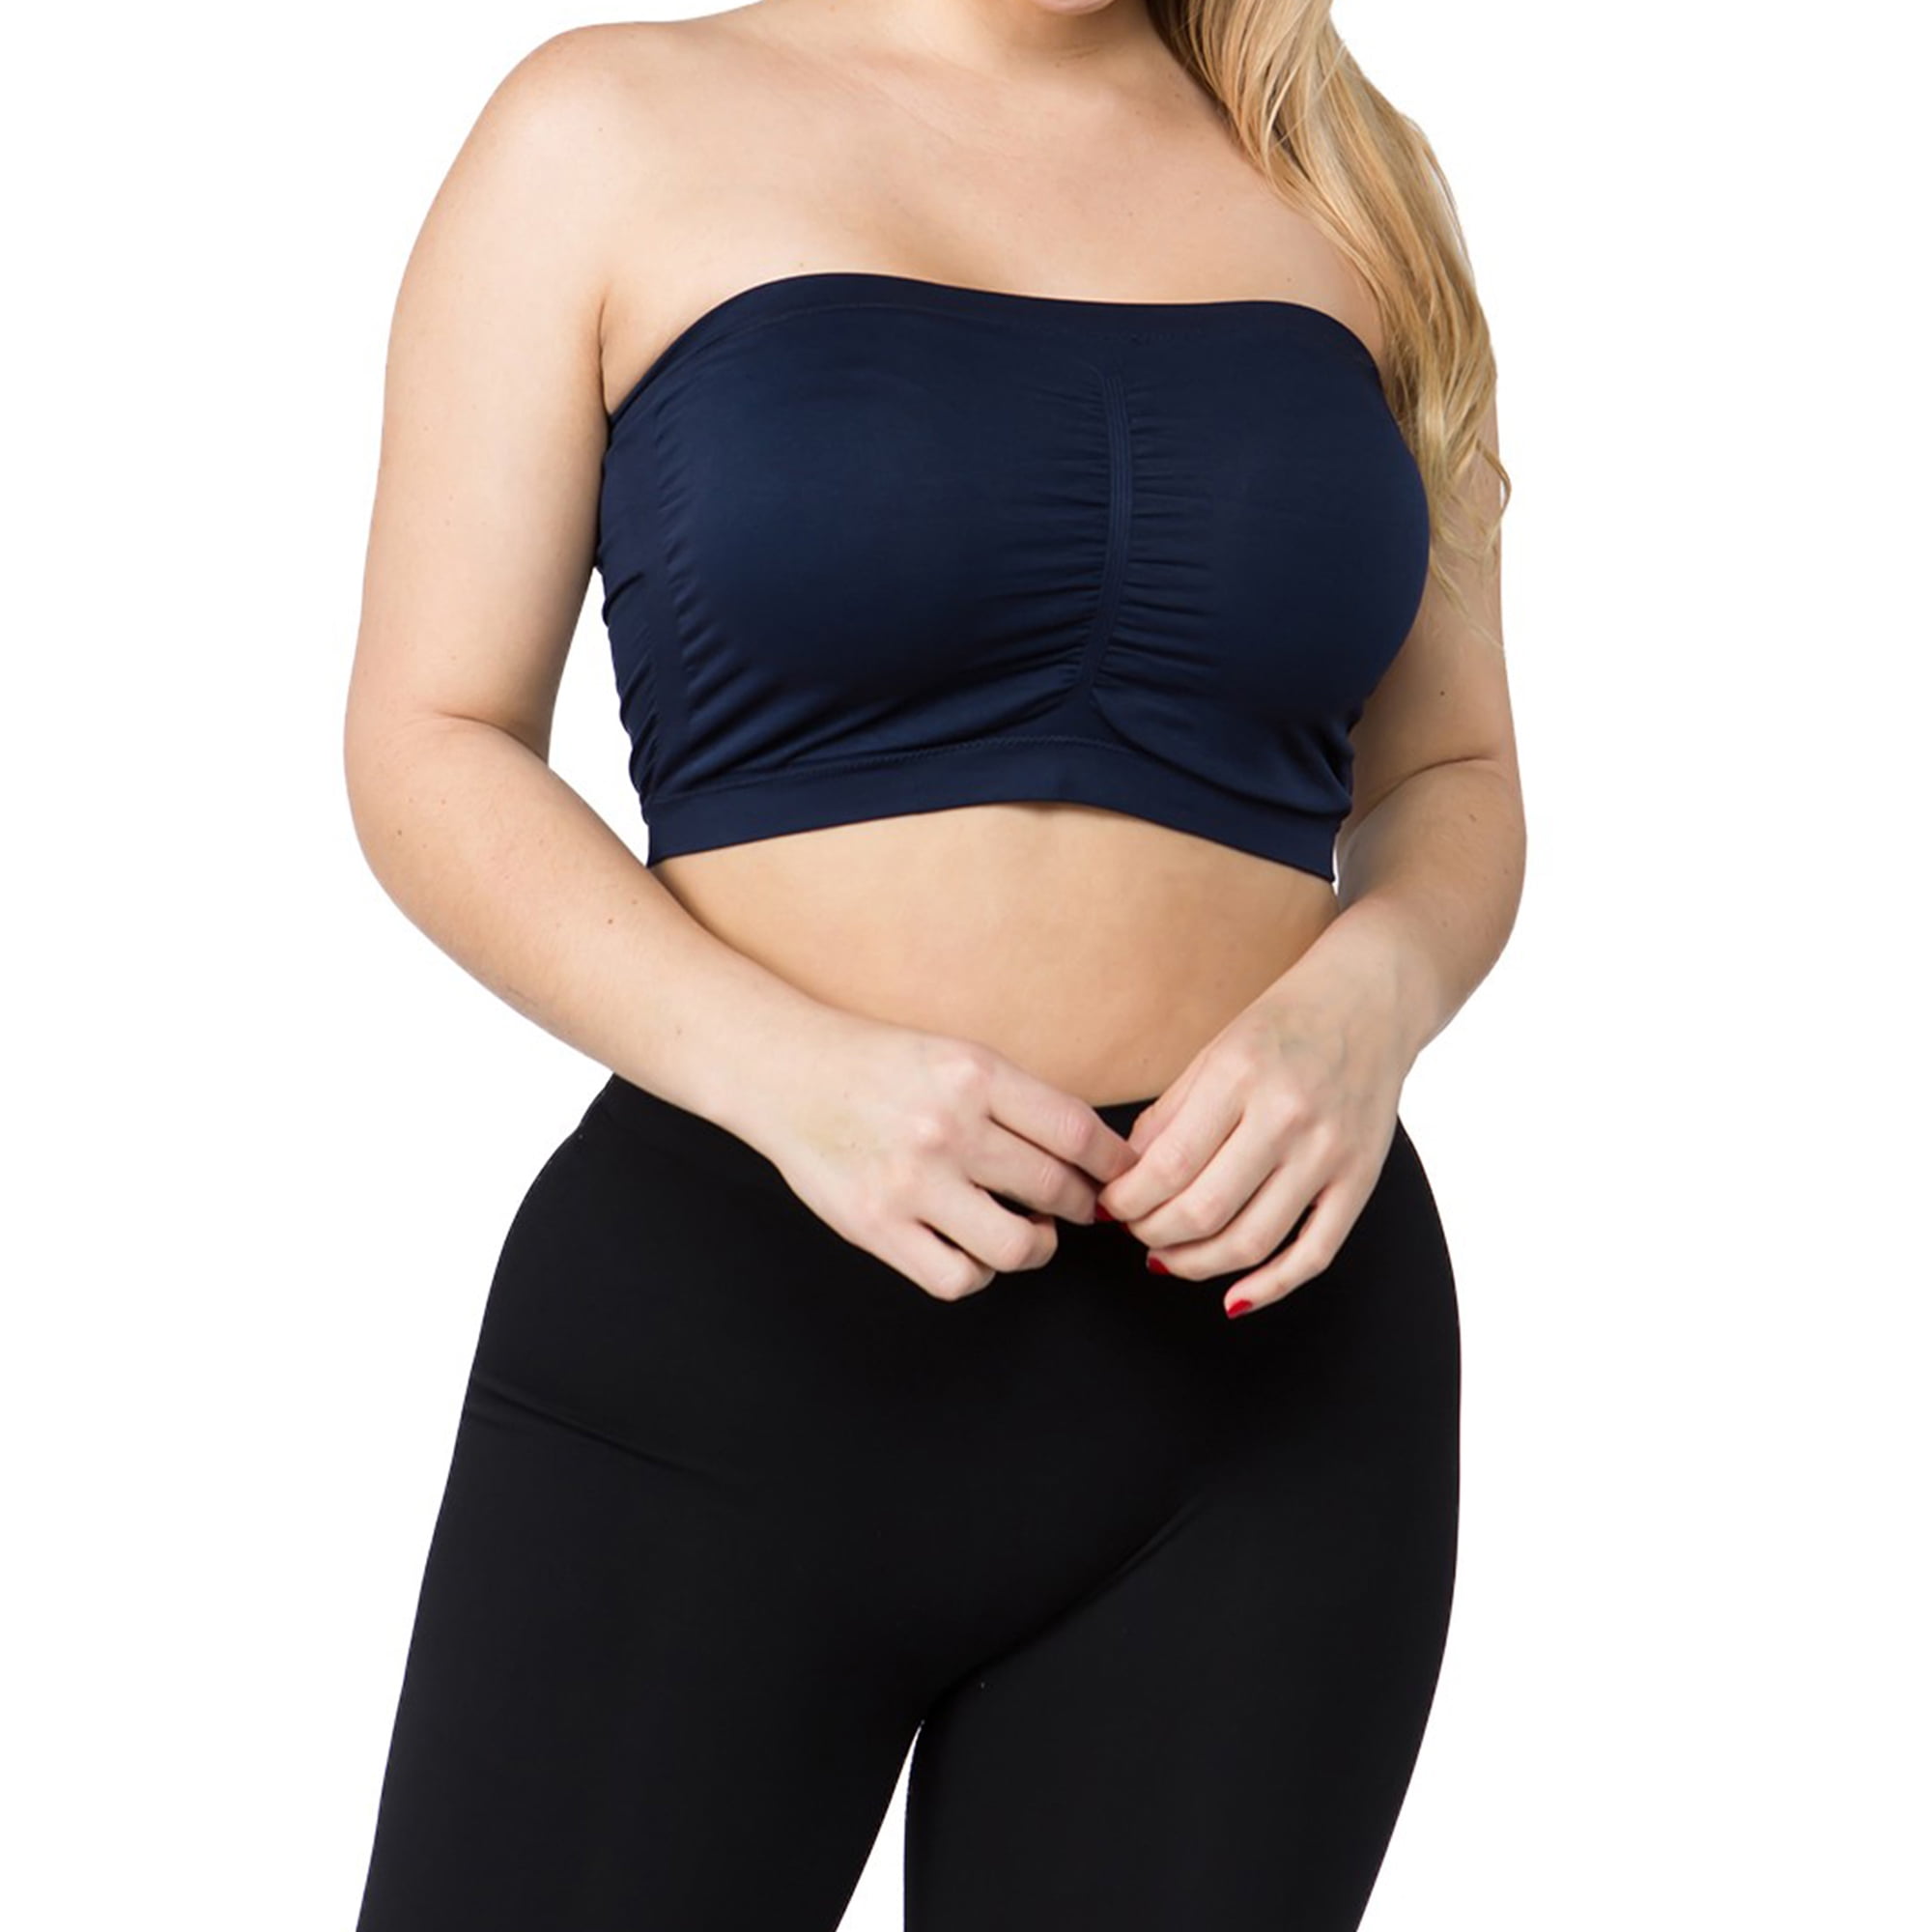 LAVRA Women's Plus Size Strapless Bandeau Padded Tube Top